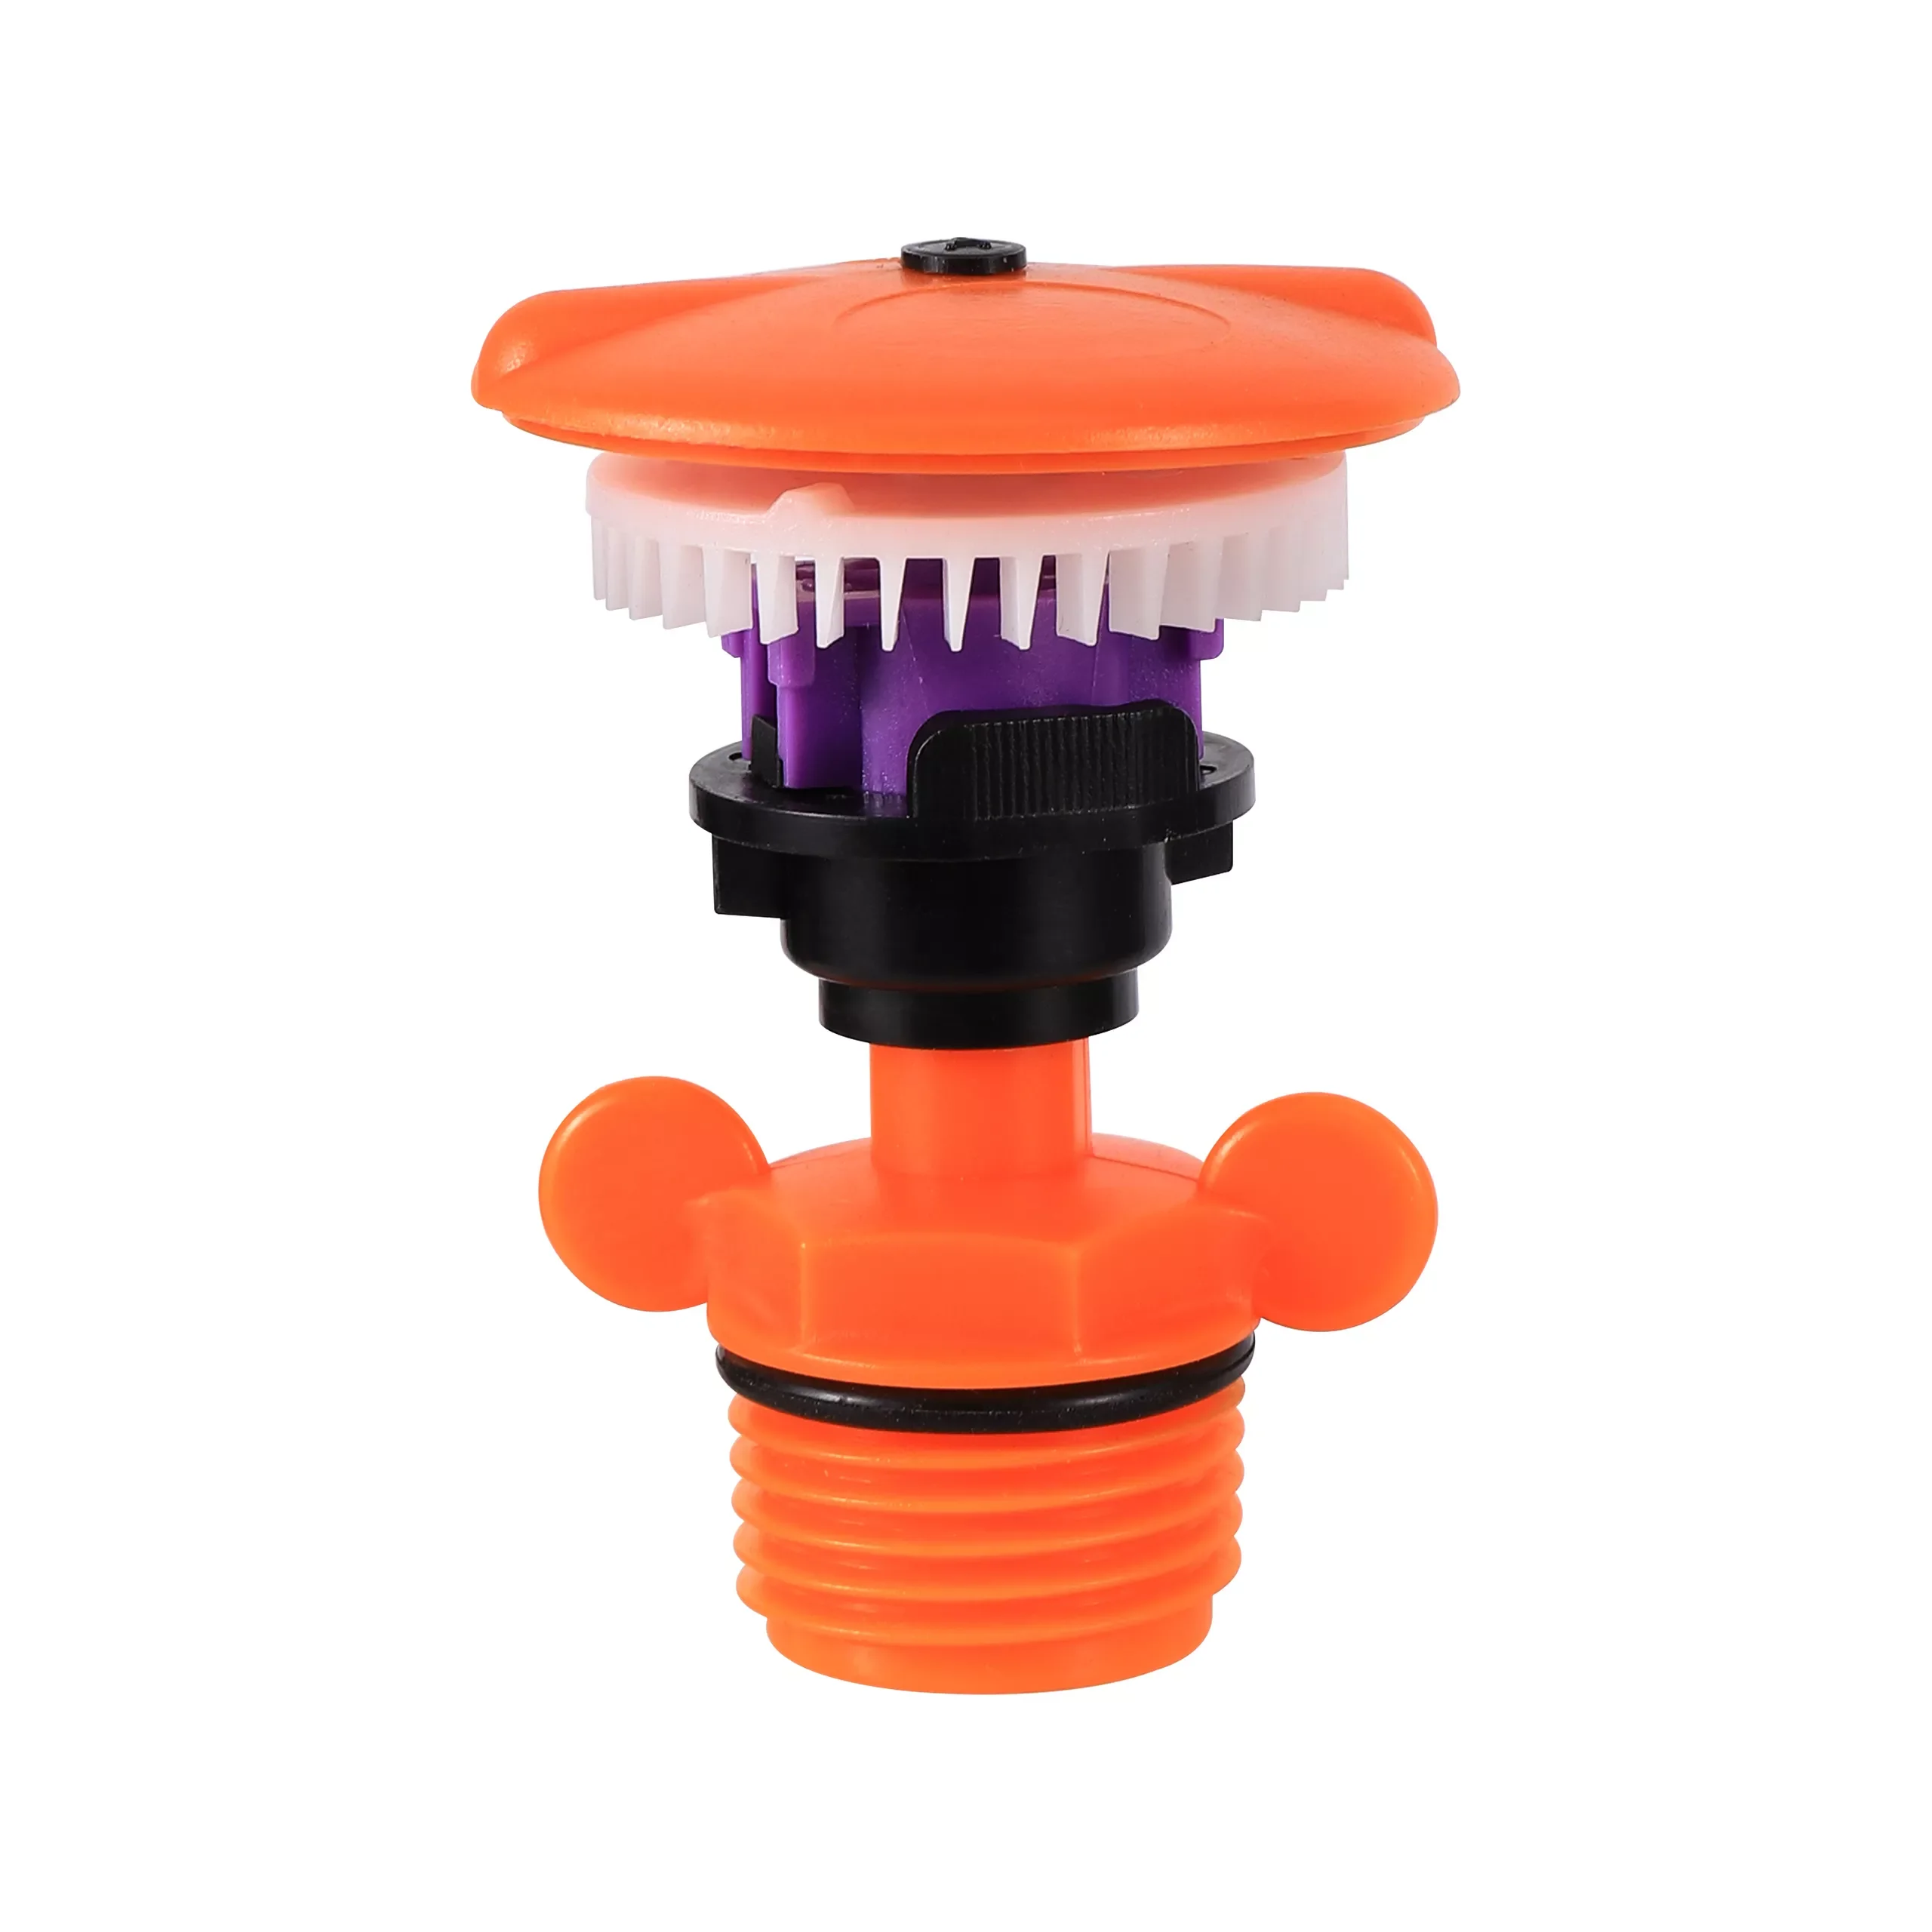 

1/2"Male Thread Garden Watering Sprinkler 360° Rotating Lawn Flower Field Orchard Irrigation Nozzle Oscillating Rotary Spr